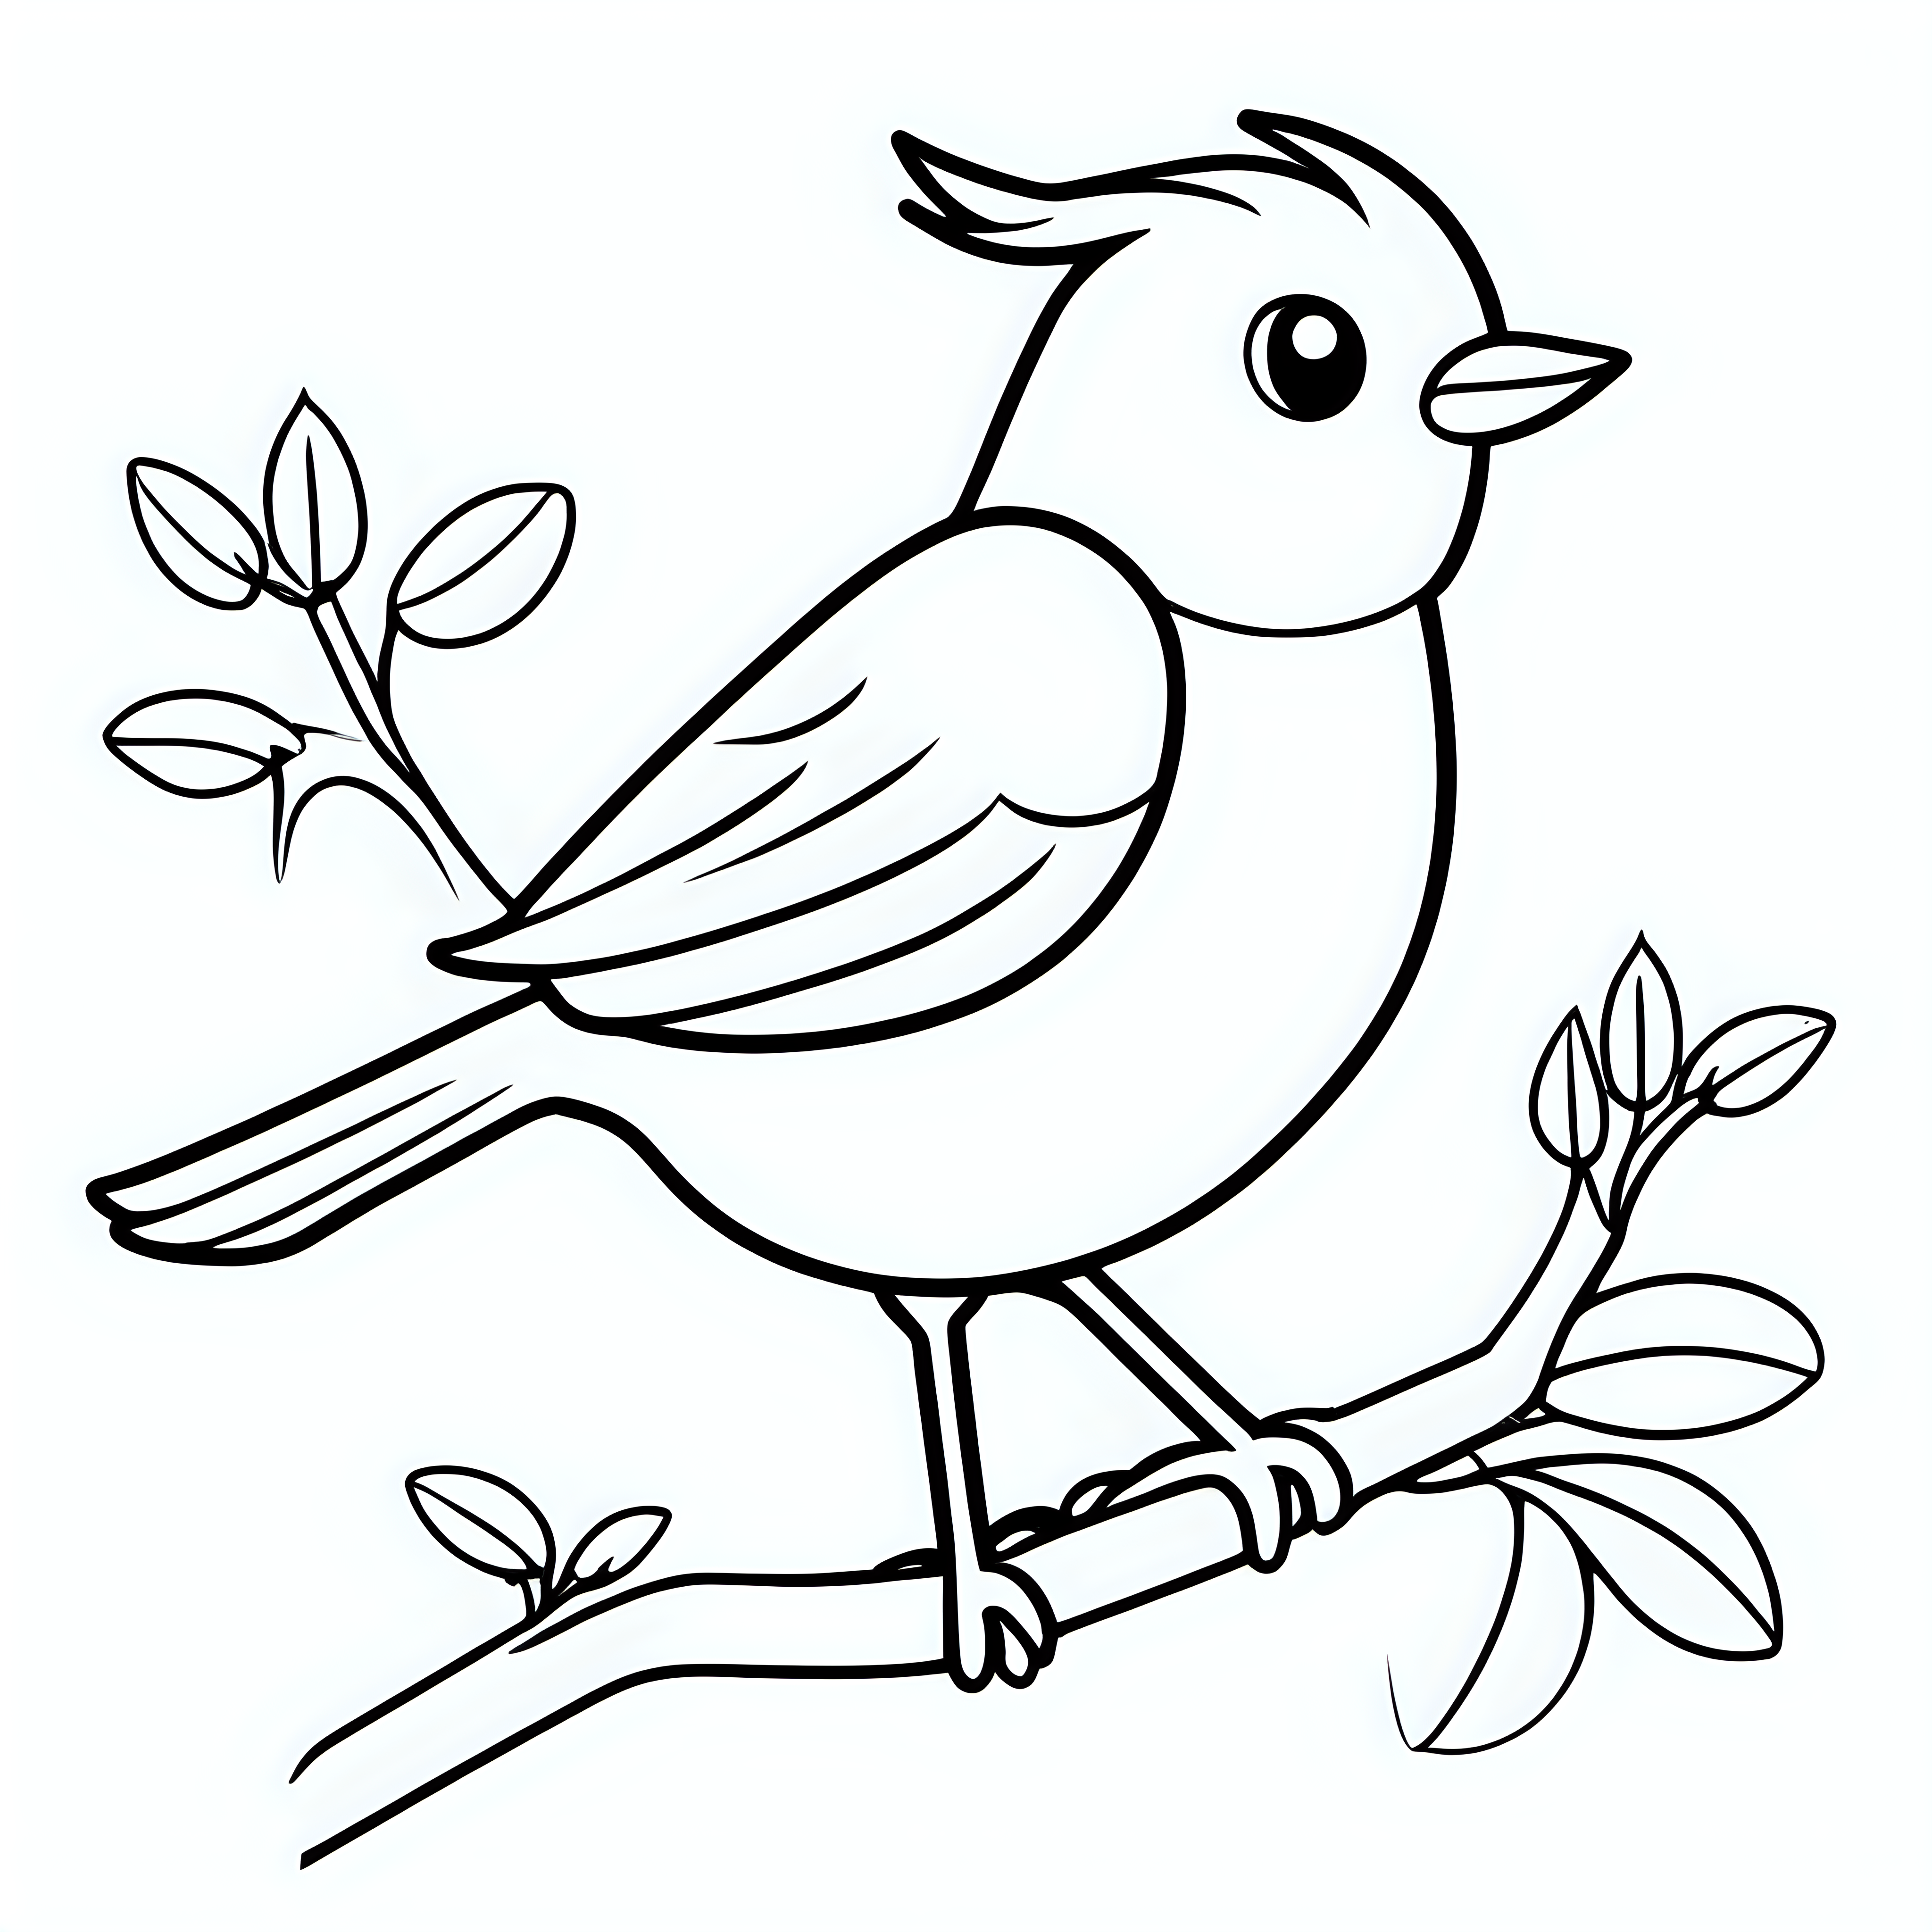 draw a cute bird with only the outline